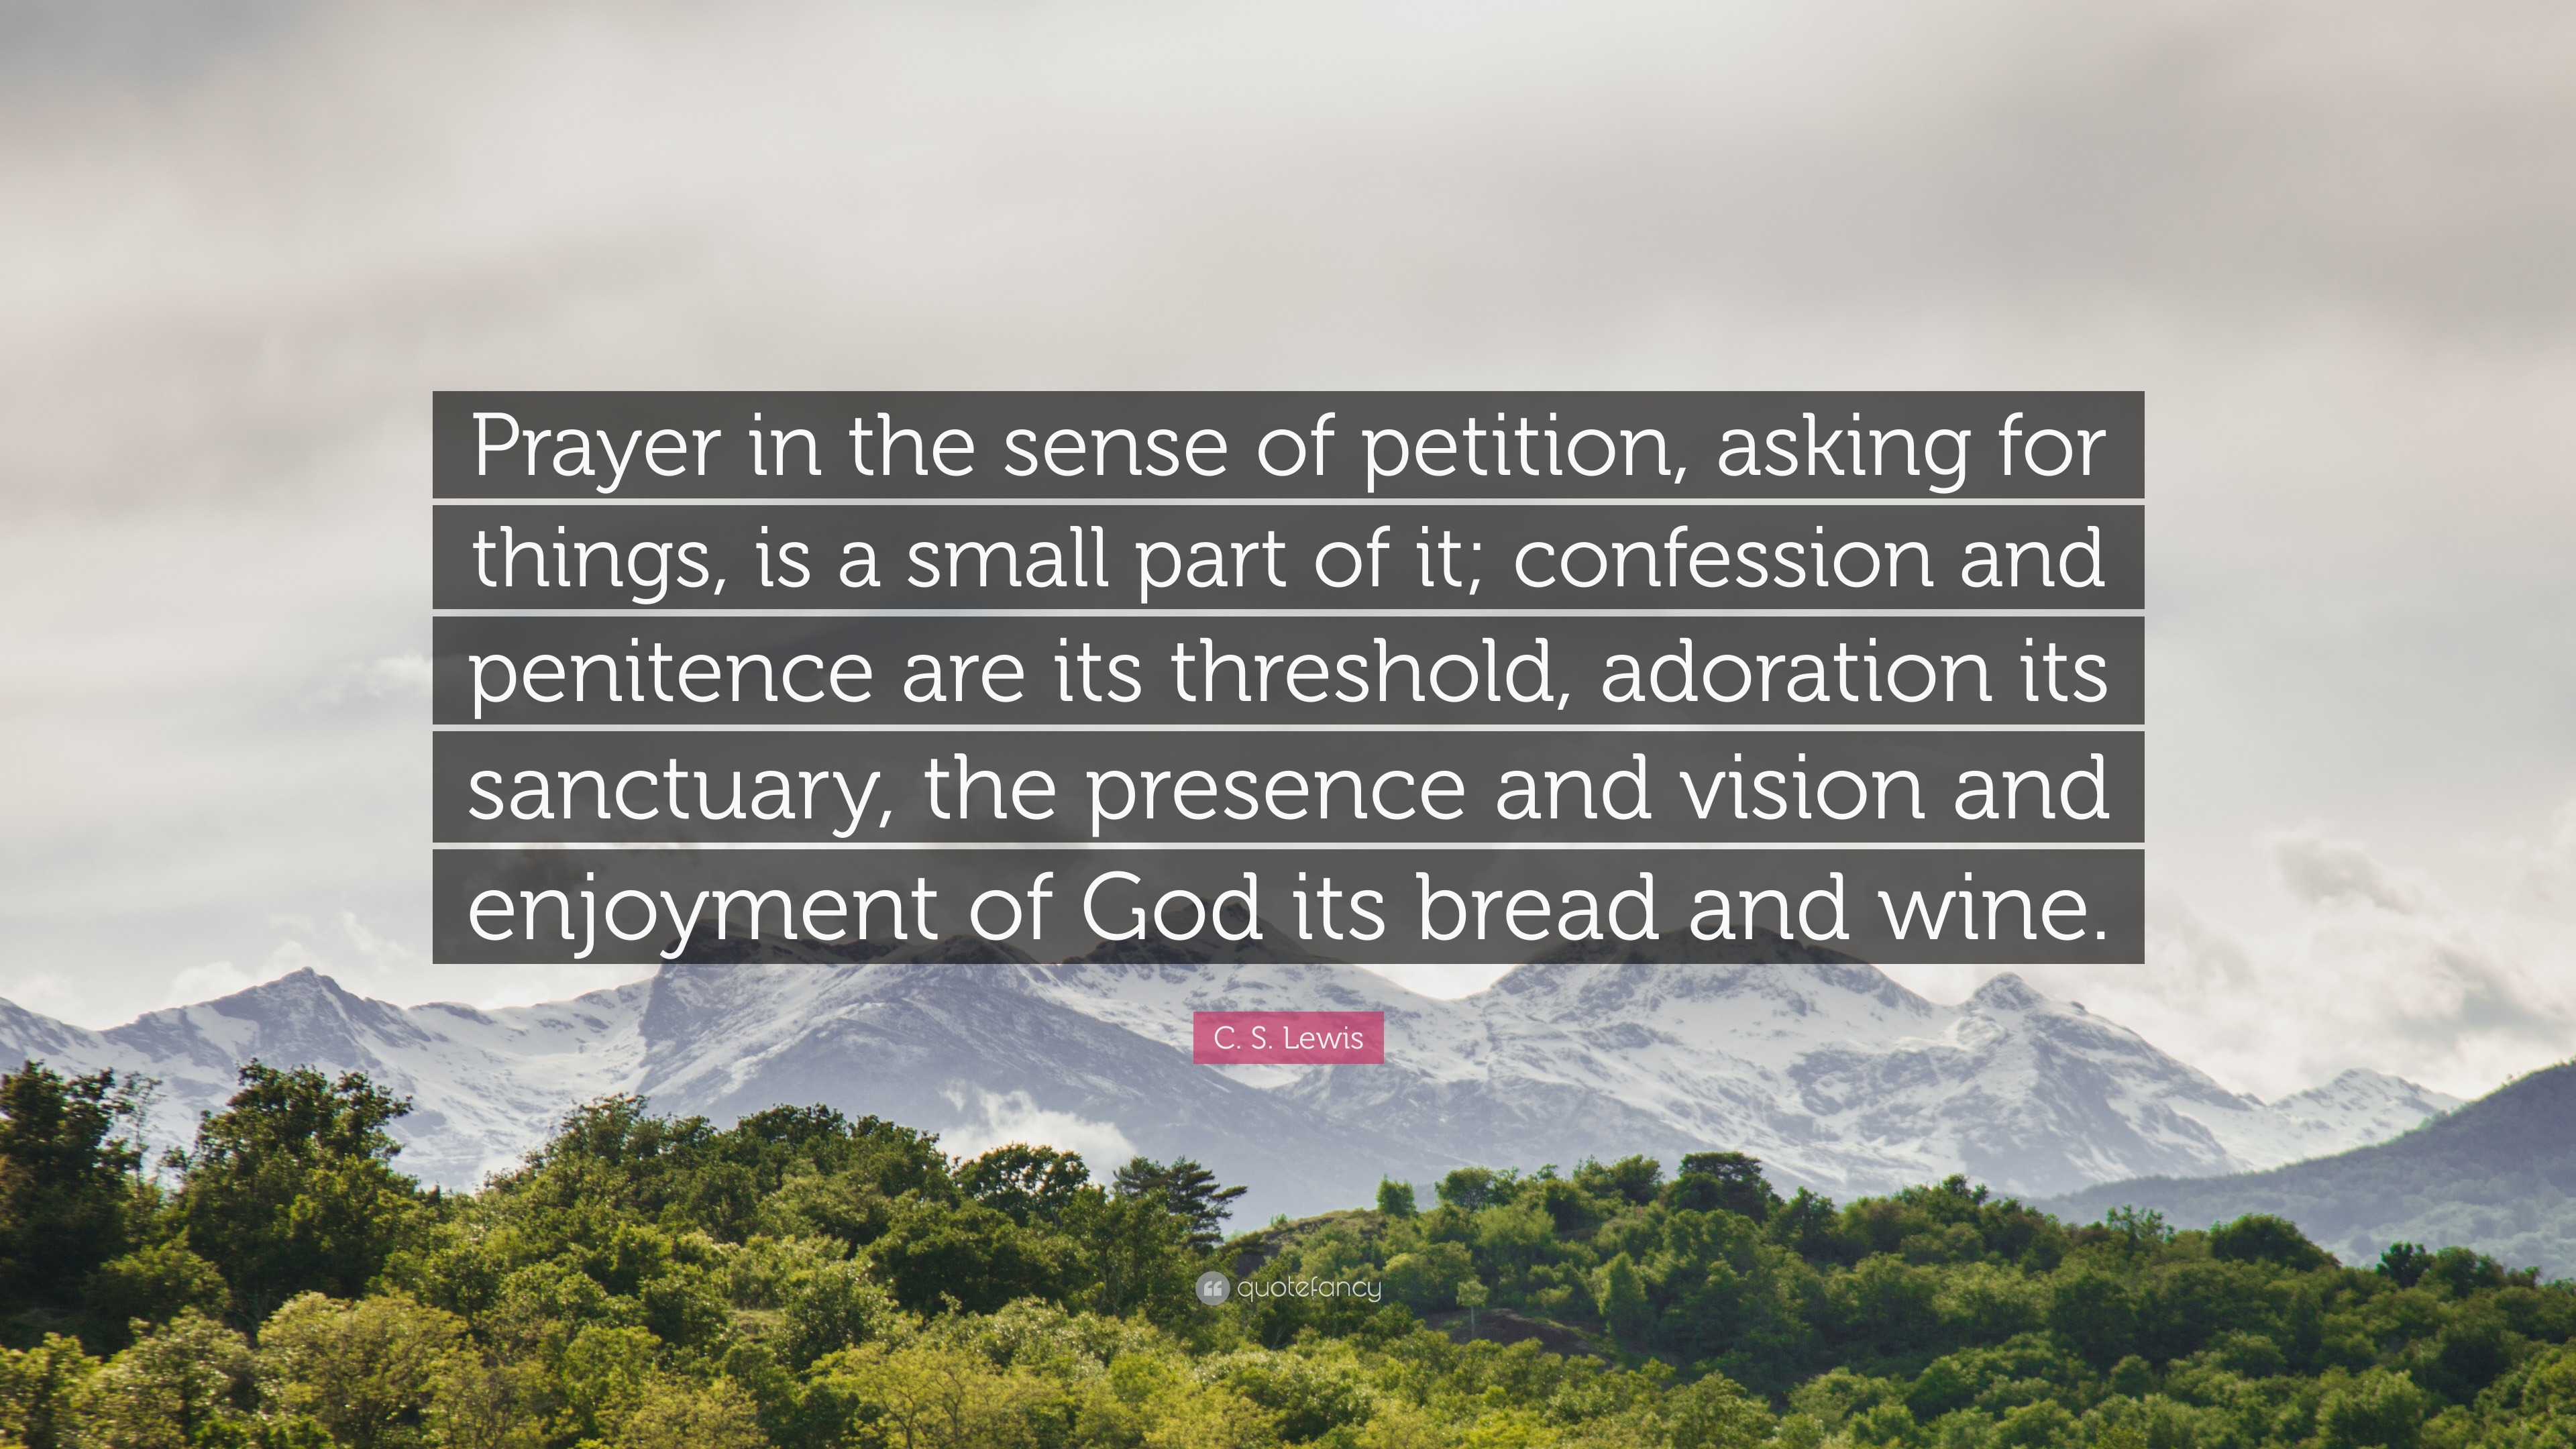 C S Lewis Quote Prayer In The Sense Of Petition Asking For Things Is A Small Part Of It Confession And Penitence Are Its Threshold A